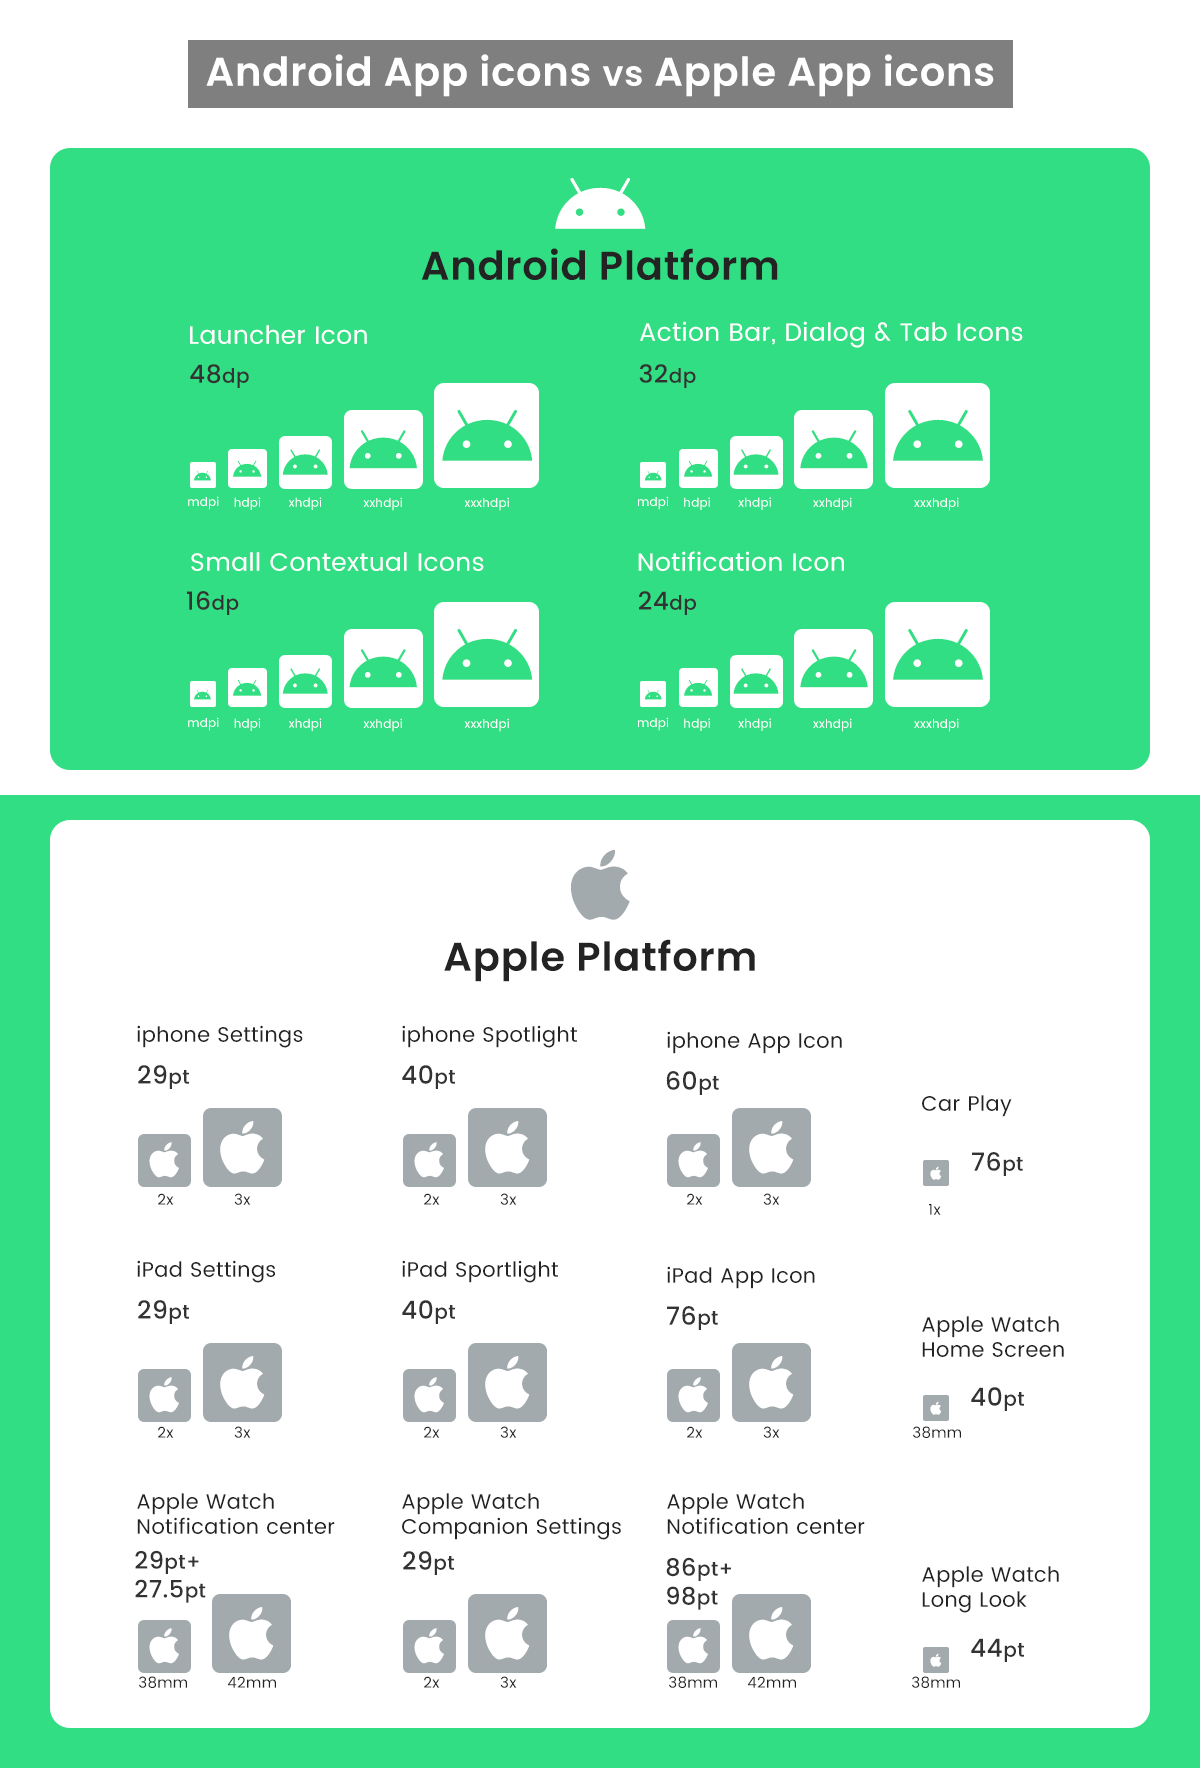 Android App icons vs Apple App icons